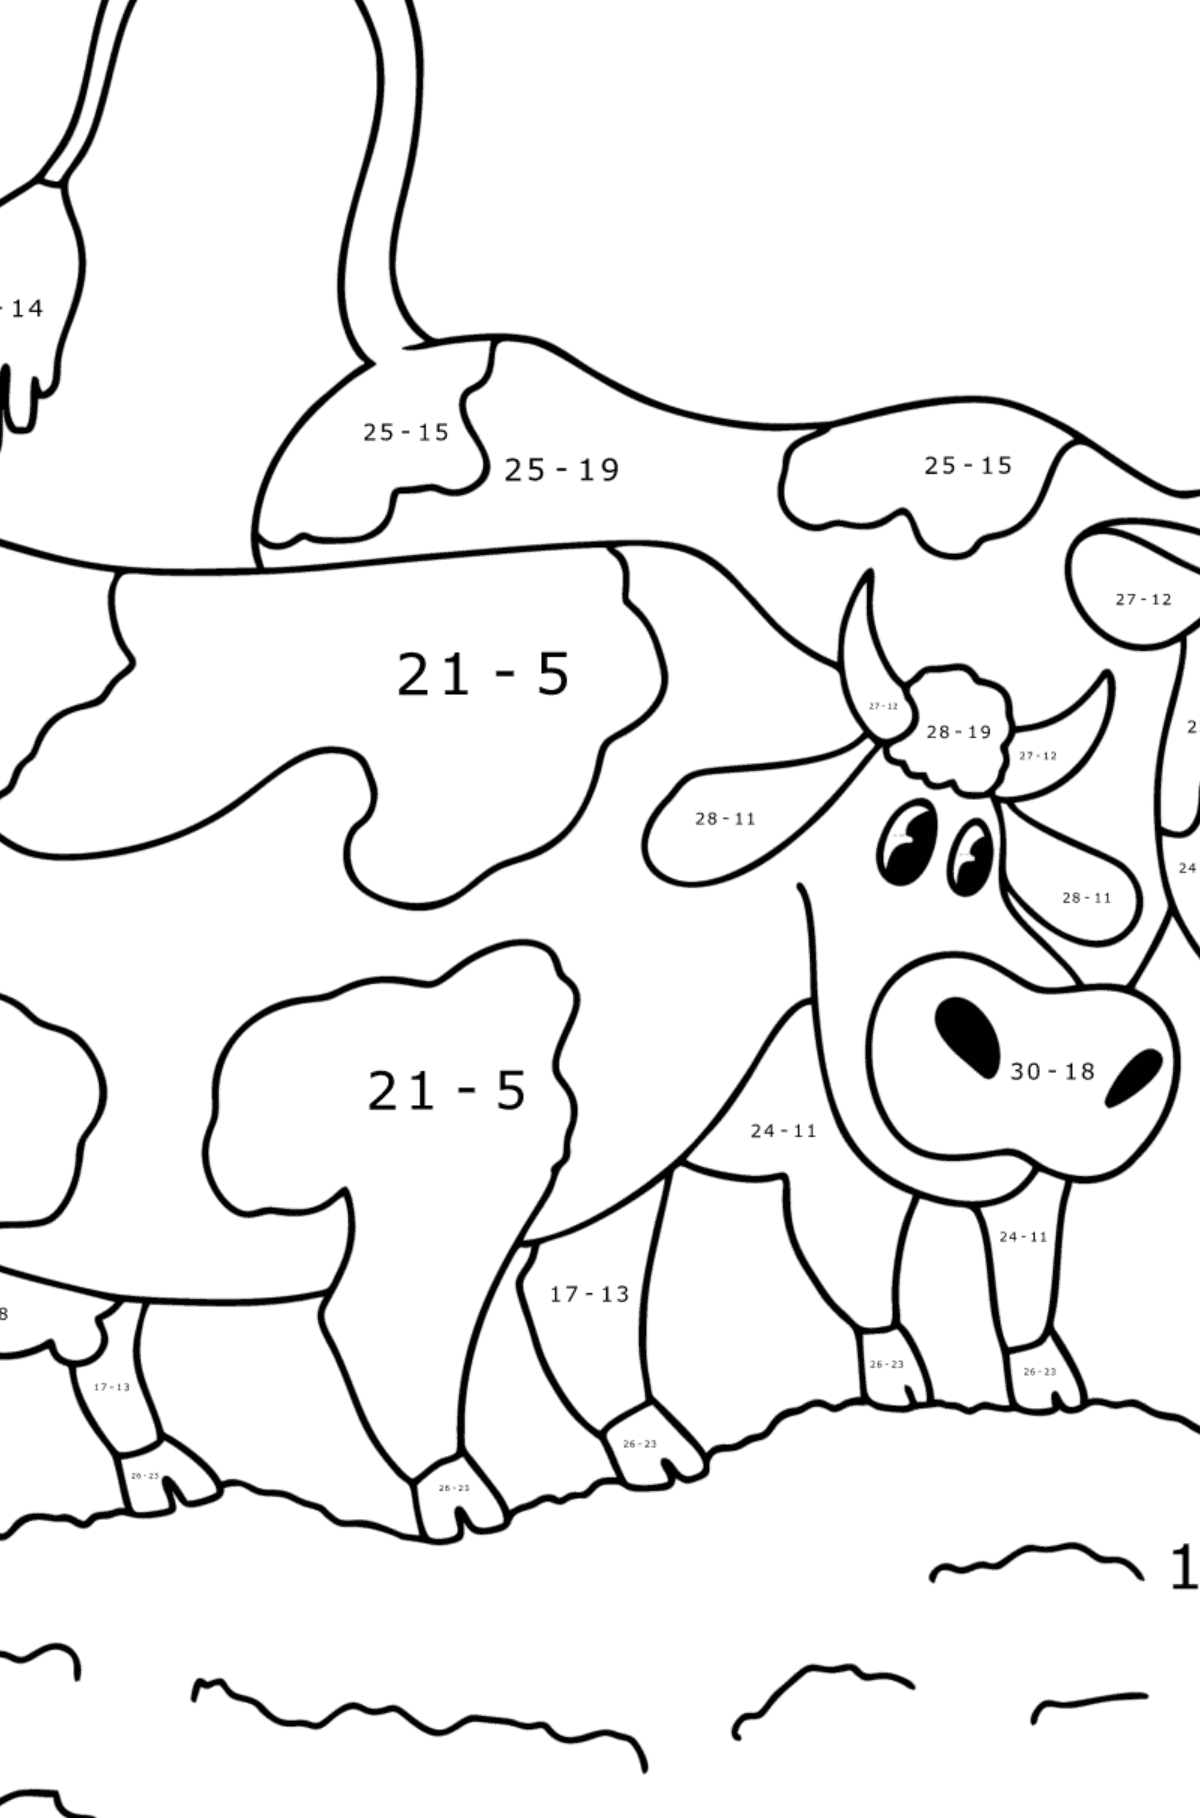 Two cows in the meadow Coloring page - Math Coloring - Subtraction for Kids